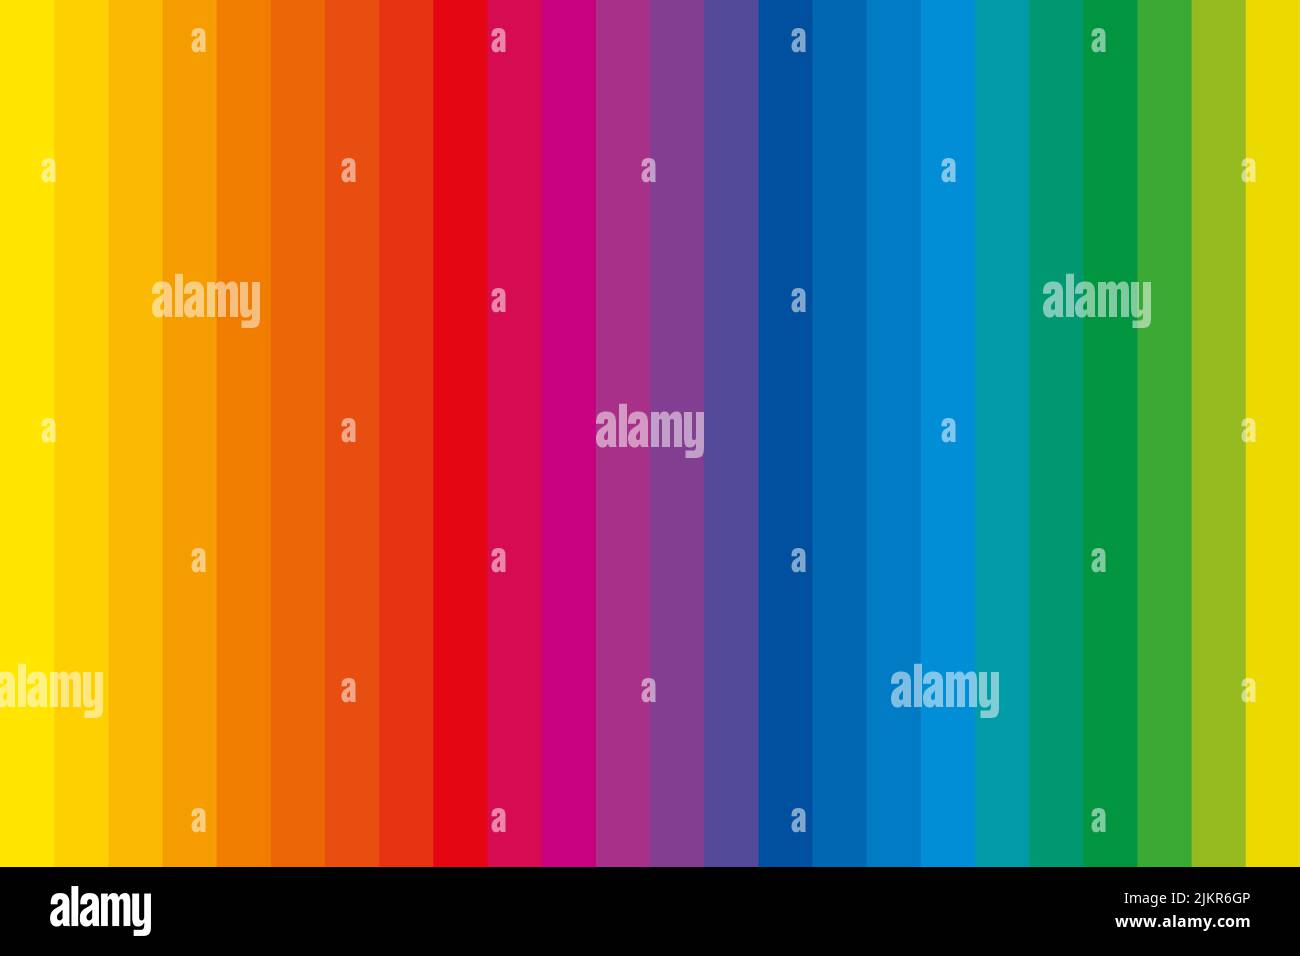 Color bars with complementary colors. Spectrum of 24 rainbow colored strips, unique color hues in a row, derived from a color wheel, being used in art. Stock Photo